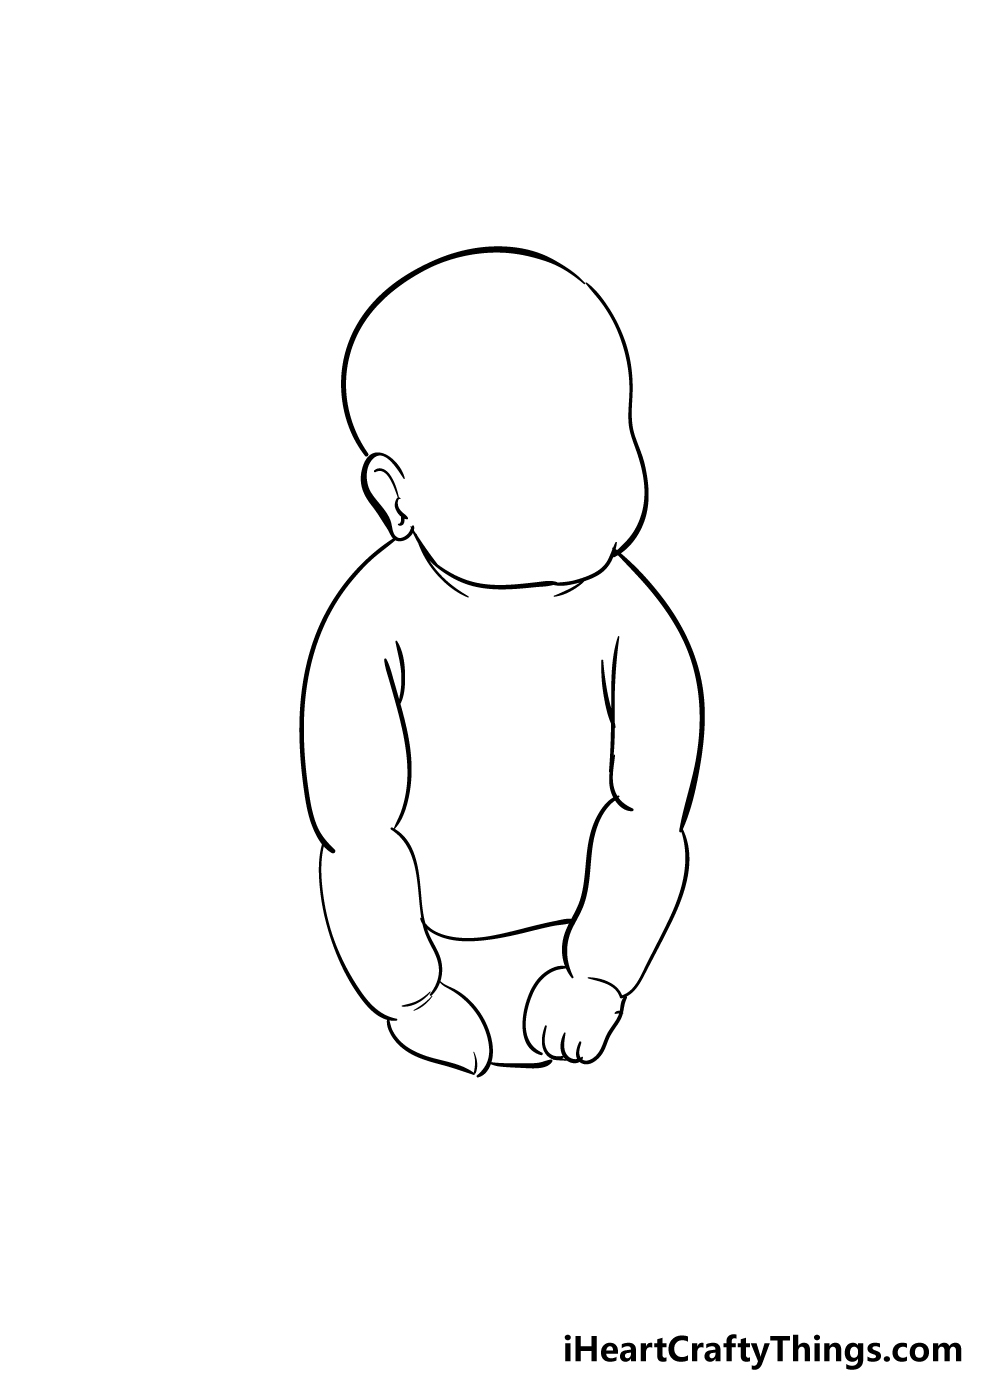 Baby Drawing - How To Draw A Baby By